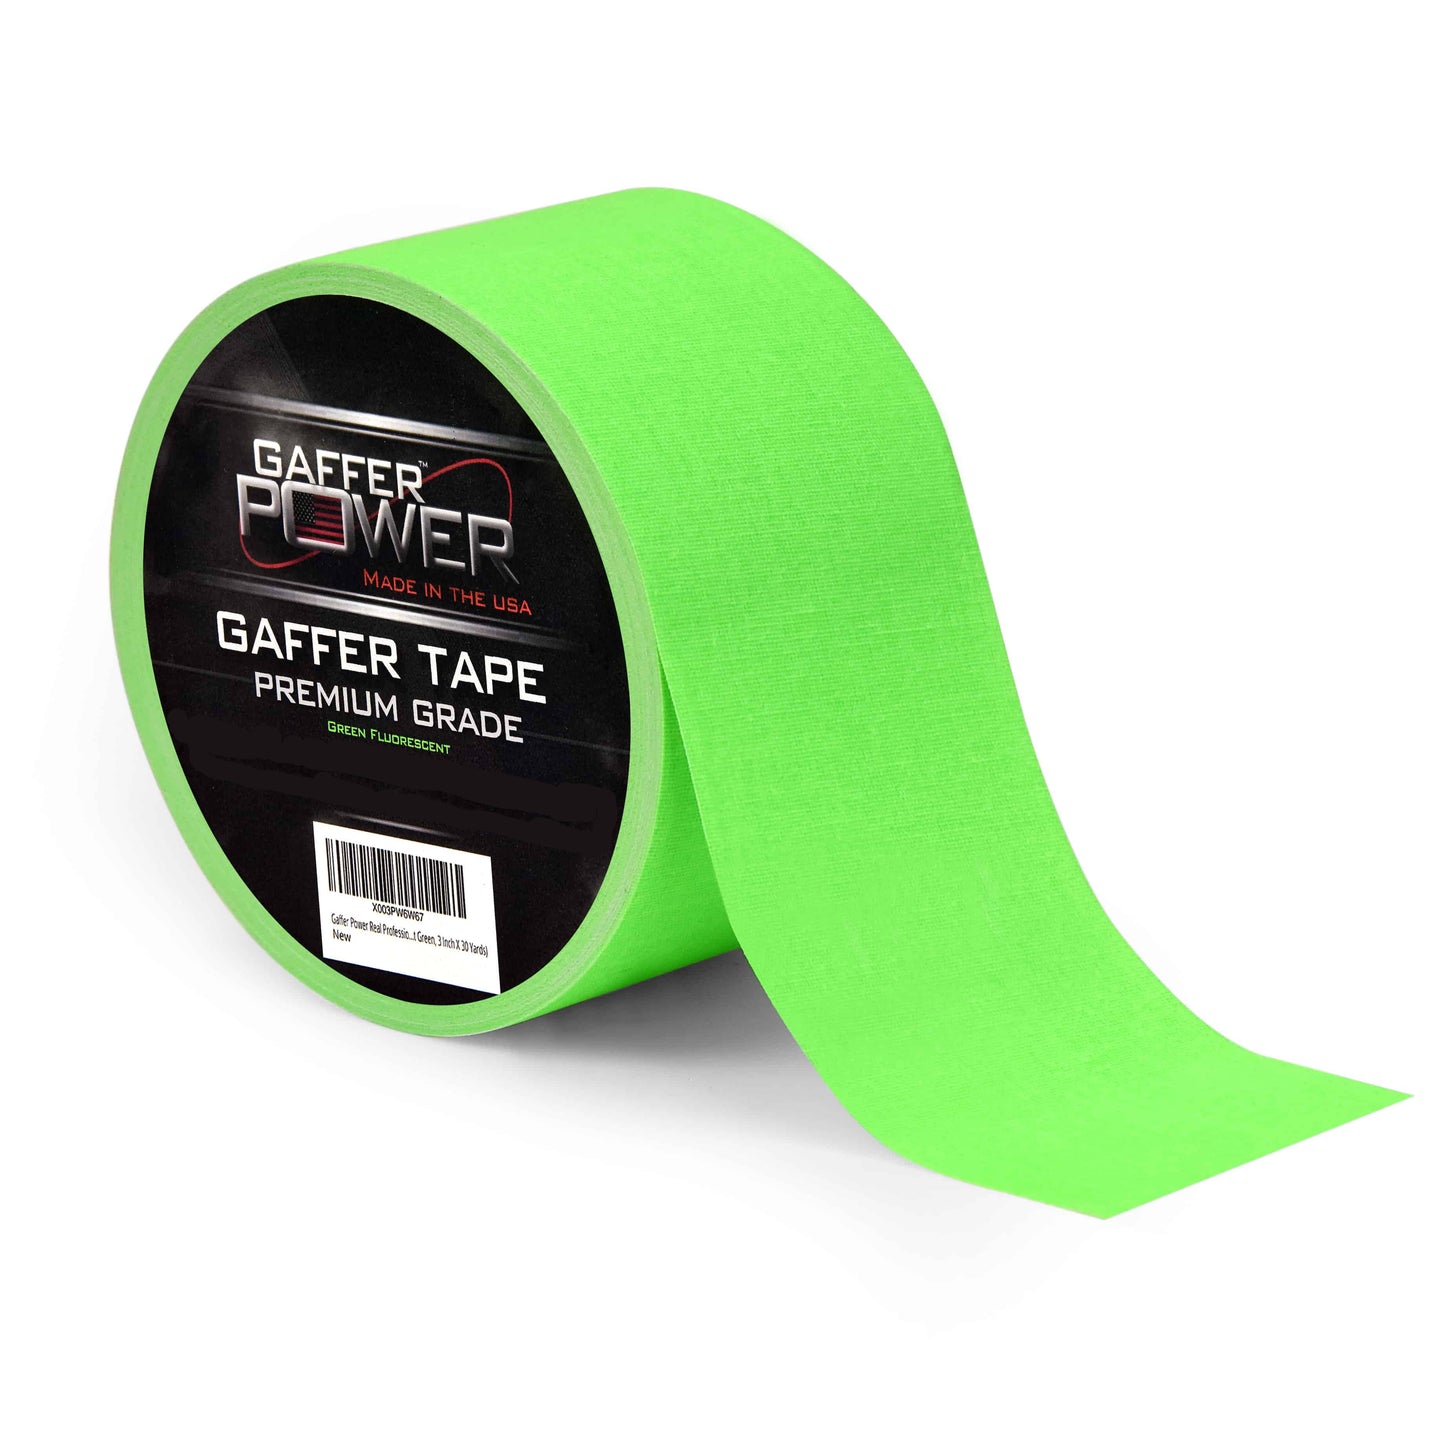 Gaffer Power Gaffer Tape, 3inches X 30 Yards, Red